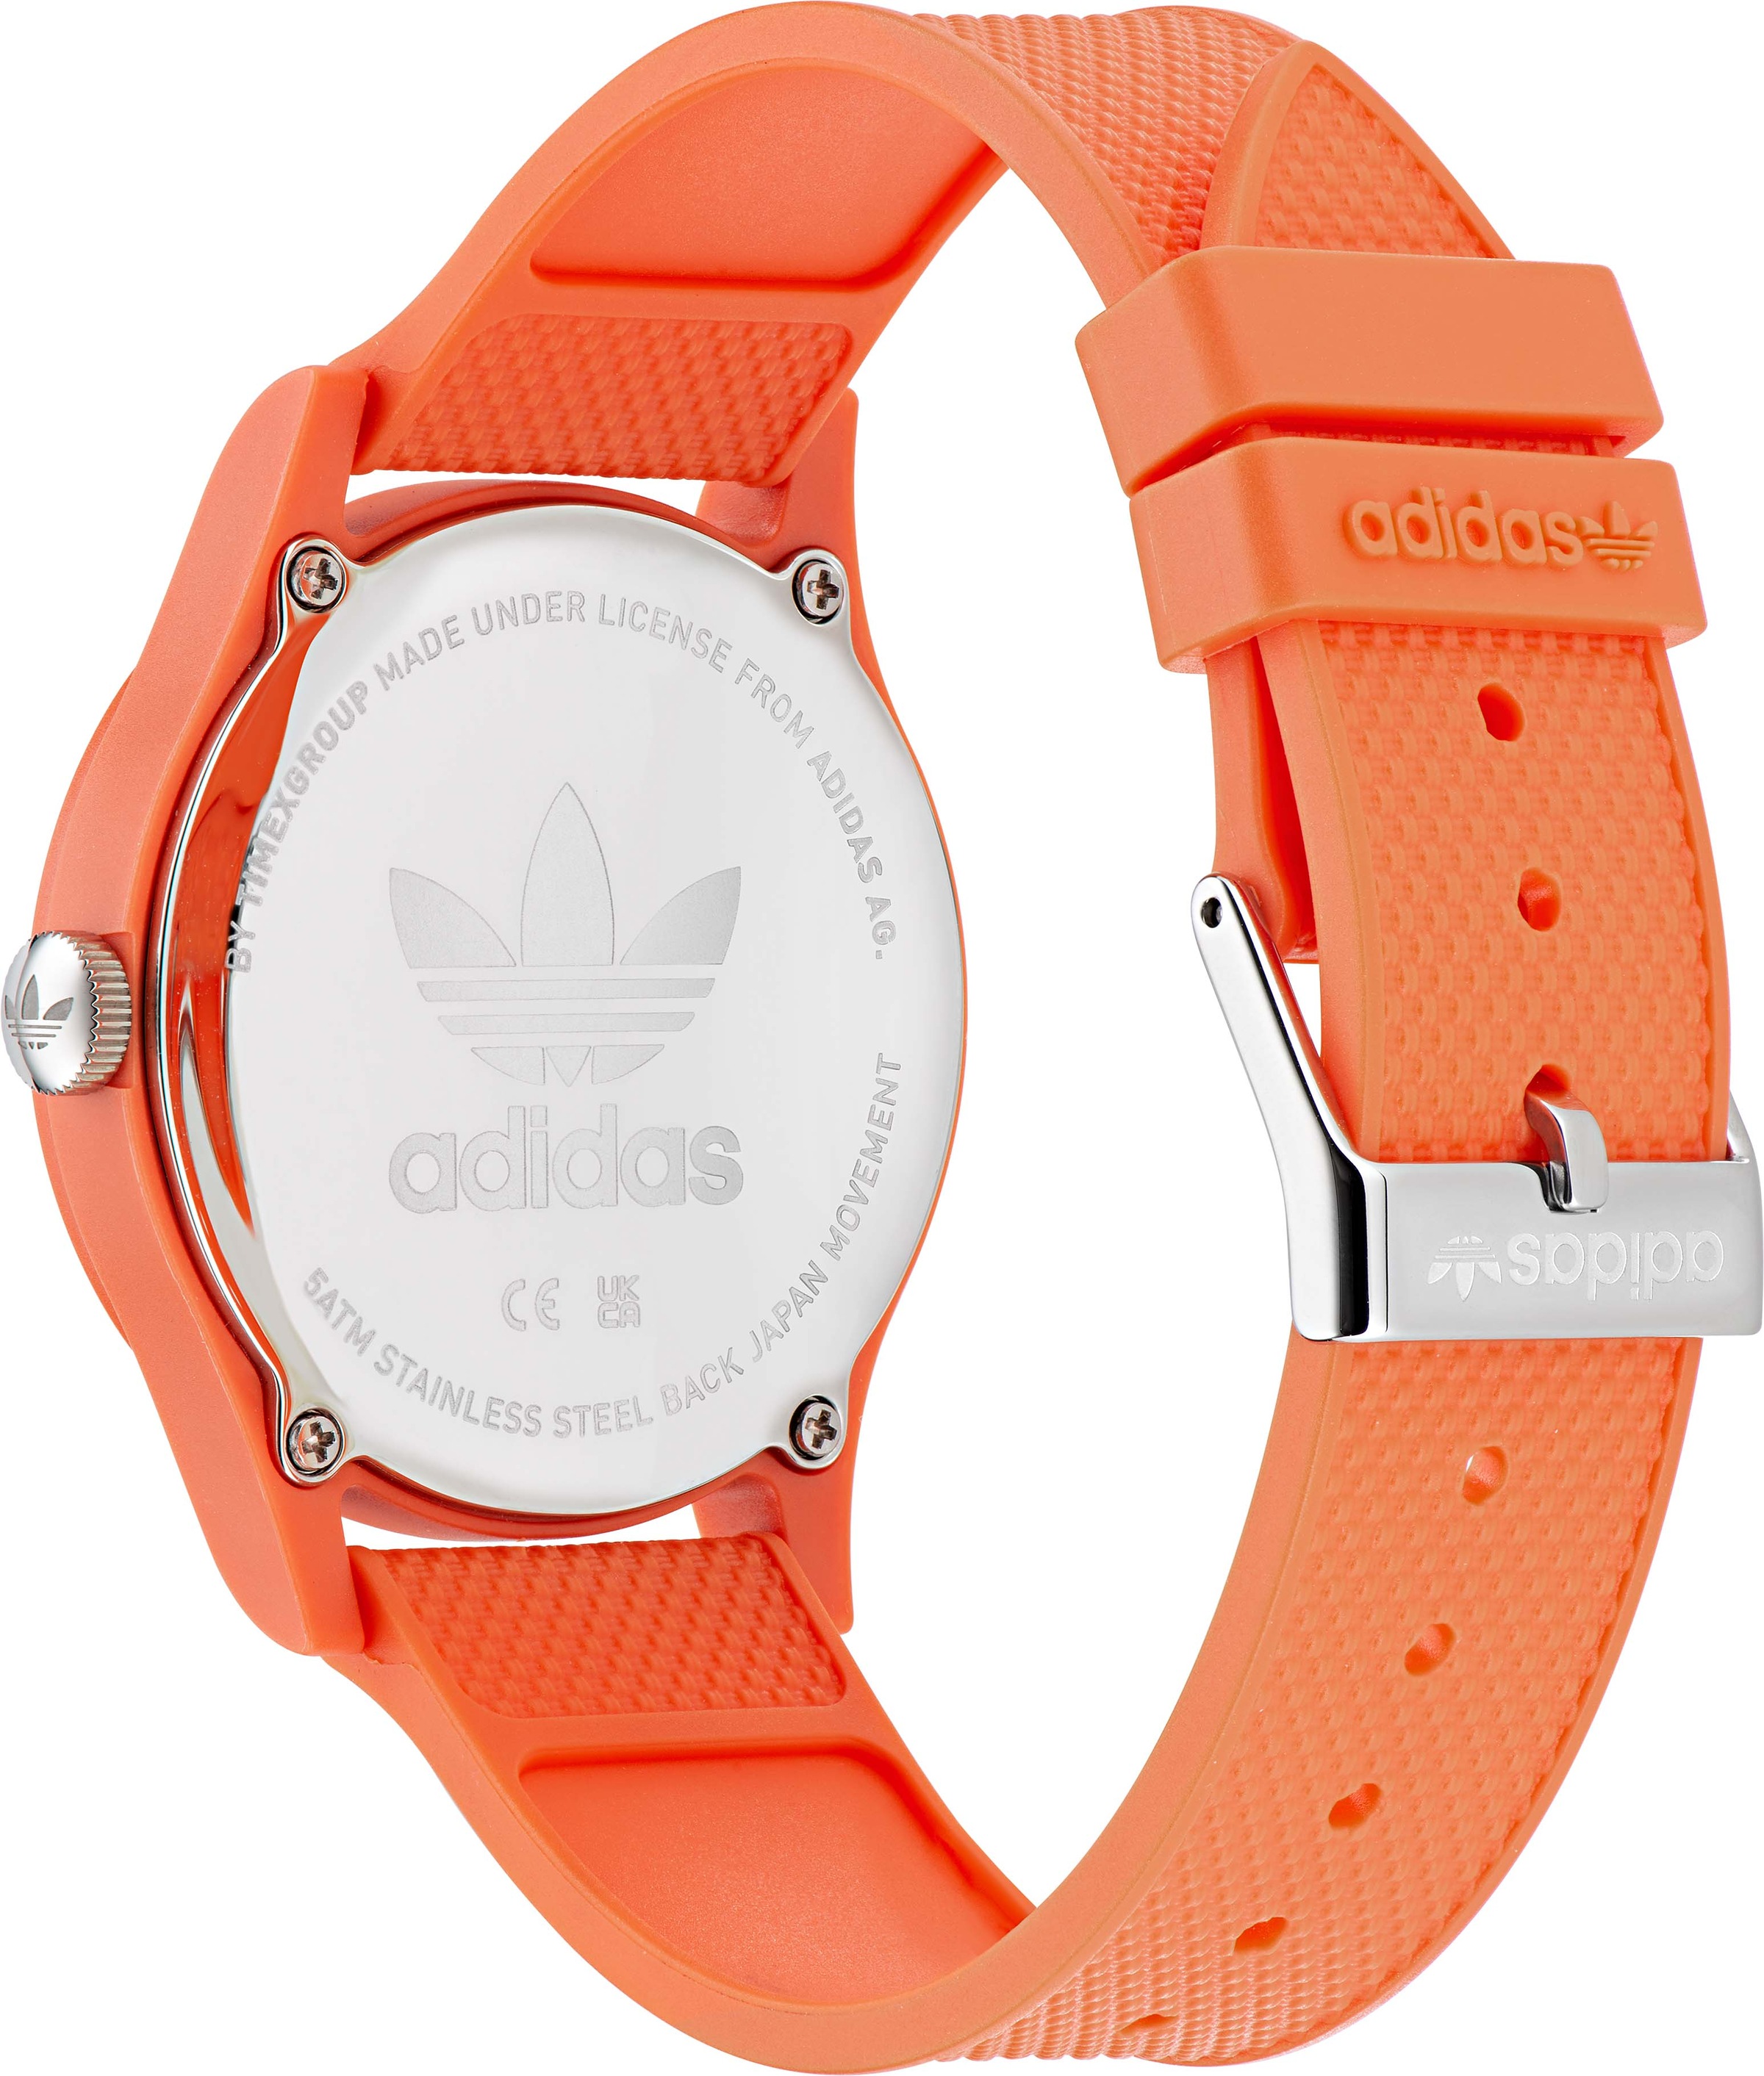 adidas Originals Solaruhr ♕ ONE, bei »PROJECT AOST225602I«